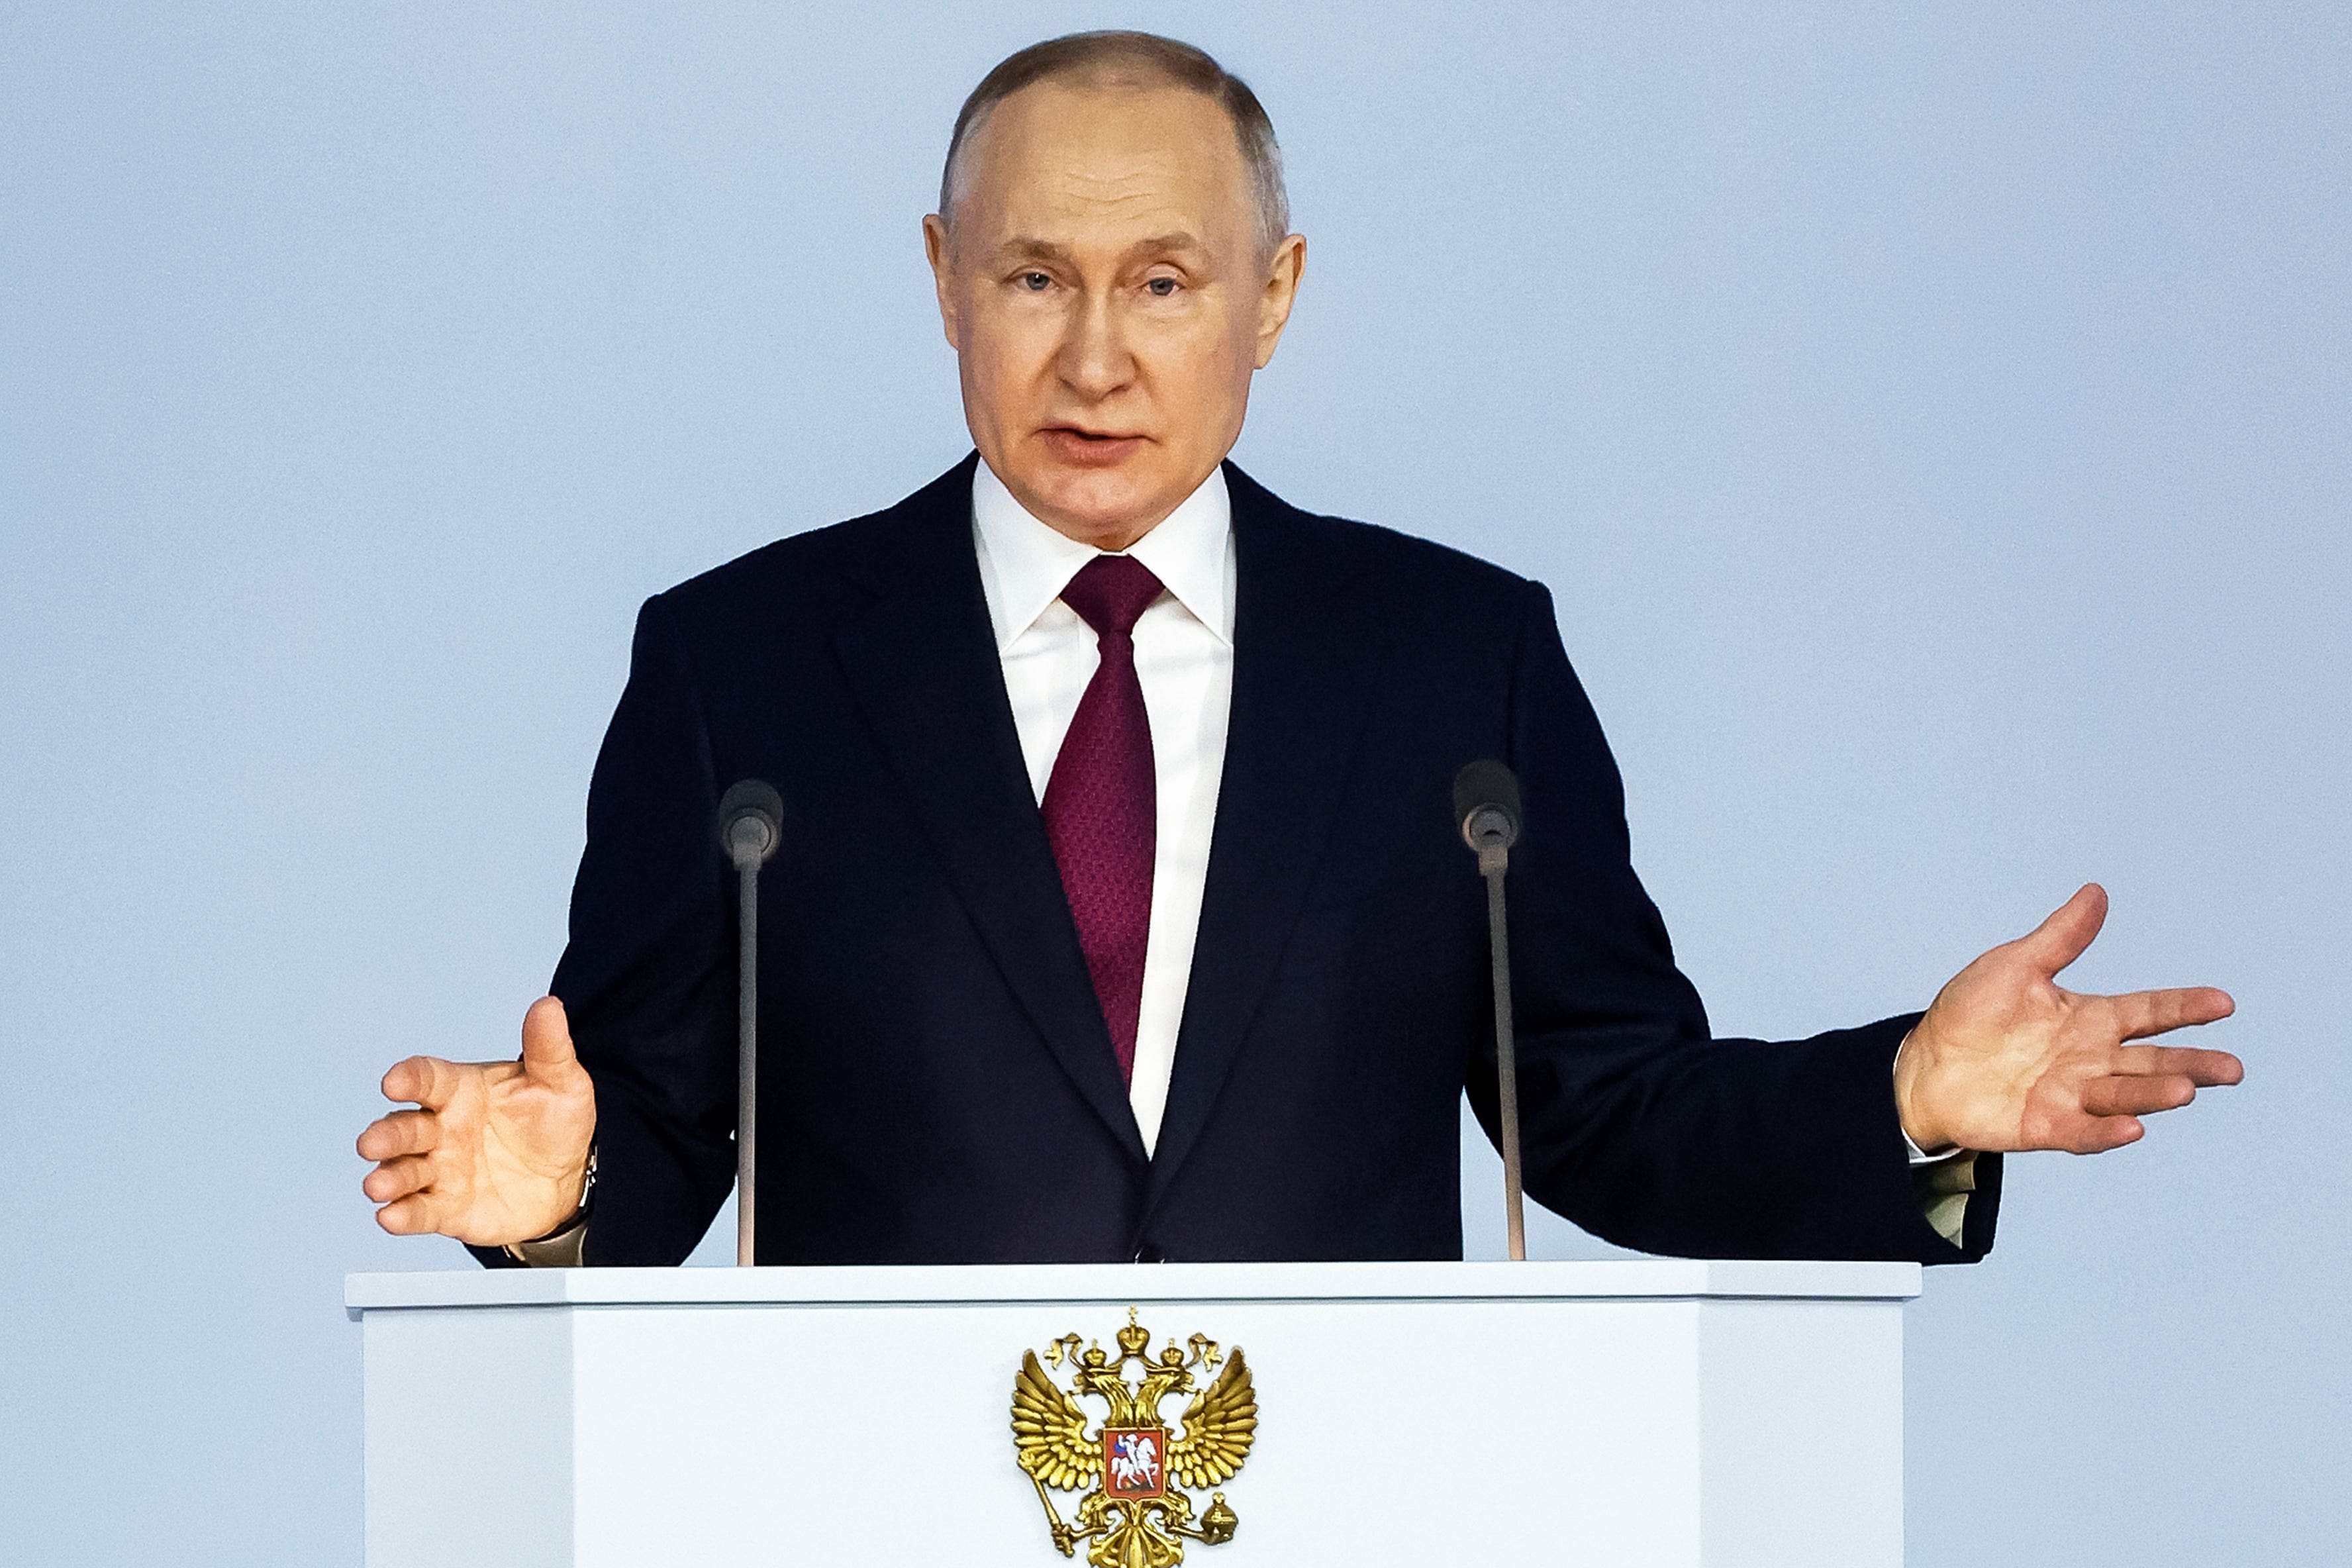 Russian President Vladimir Putin gestures as he gives his annual state of the nation address in Moscow, Russia (Dmitry Astakhov, Sputnik, Kremlin Pool Photo via AP)